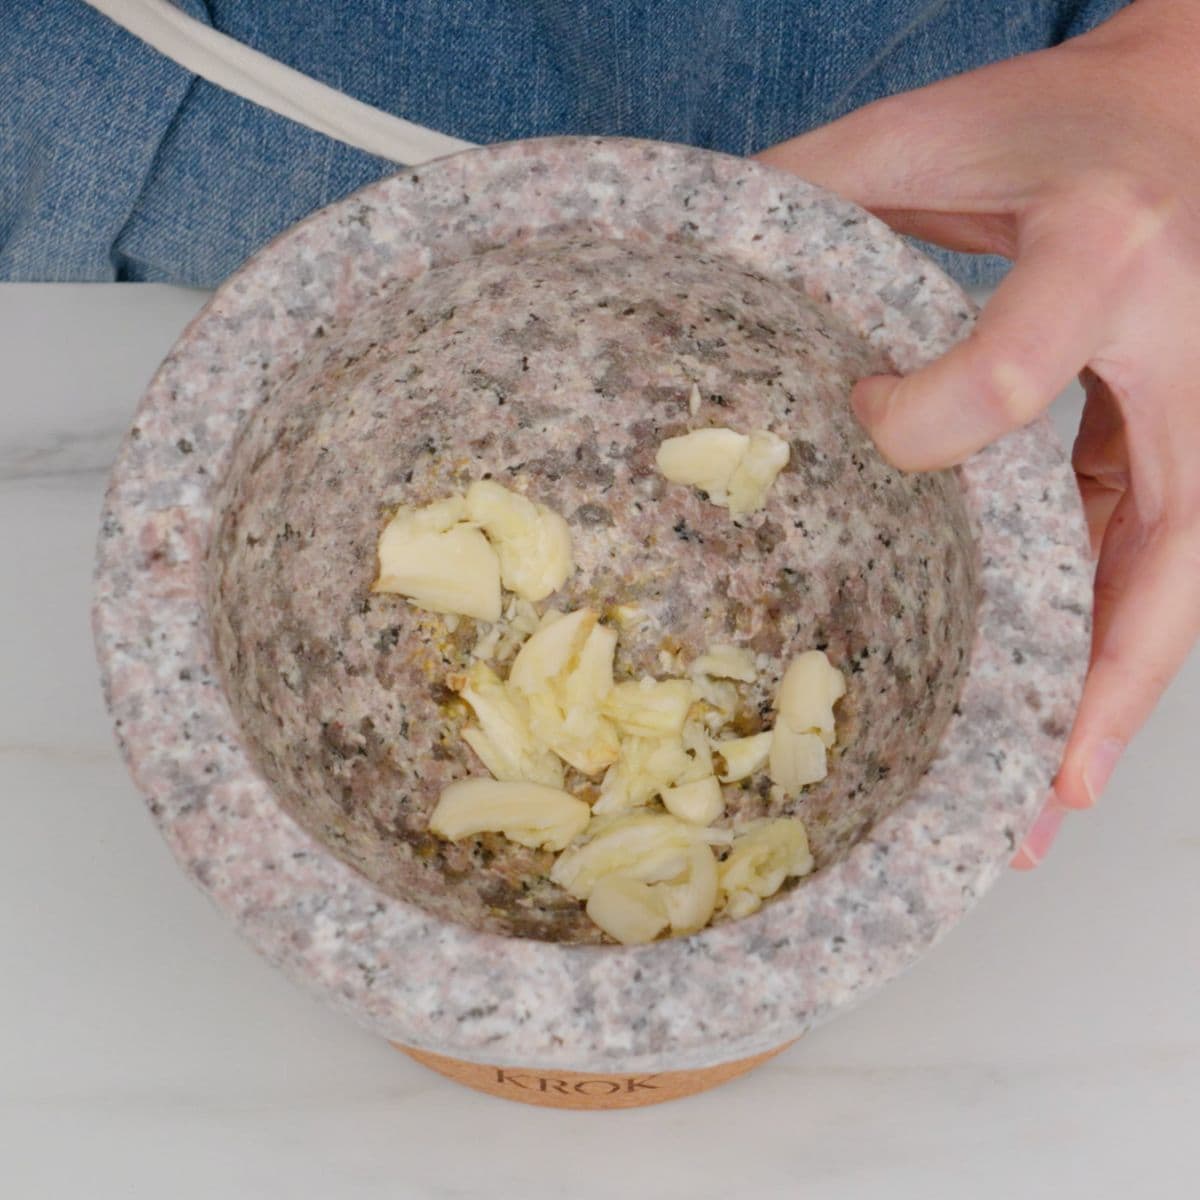 pounded chunky garlic in mortar and pestle